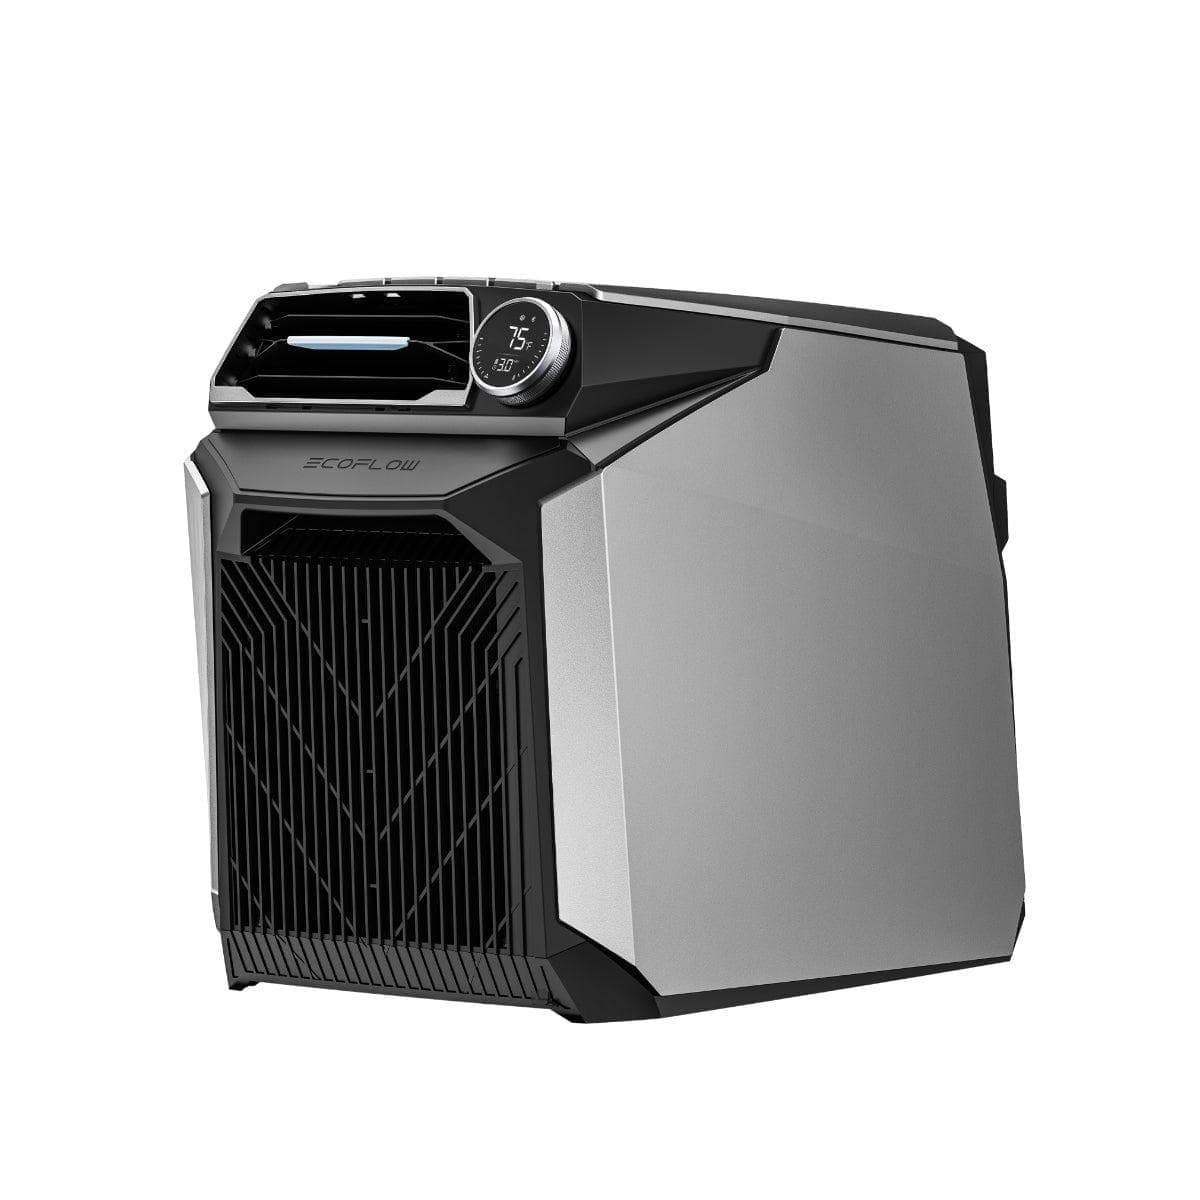 EcoFlow Wave Portable Air Conditioner (Recommended Product)